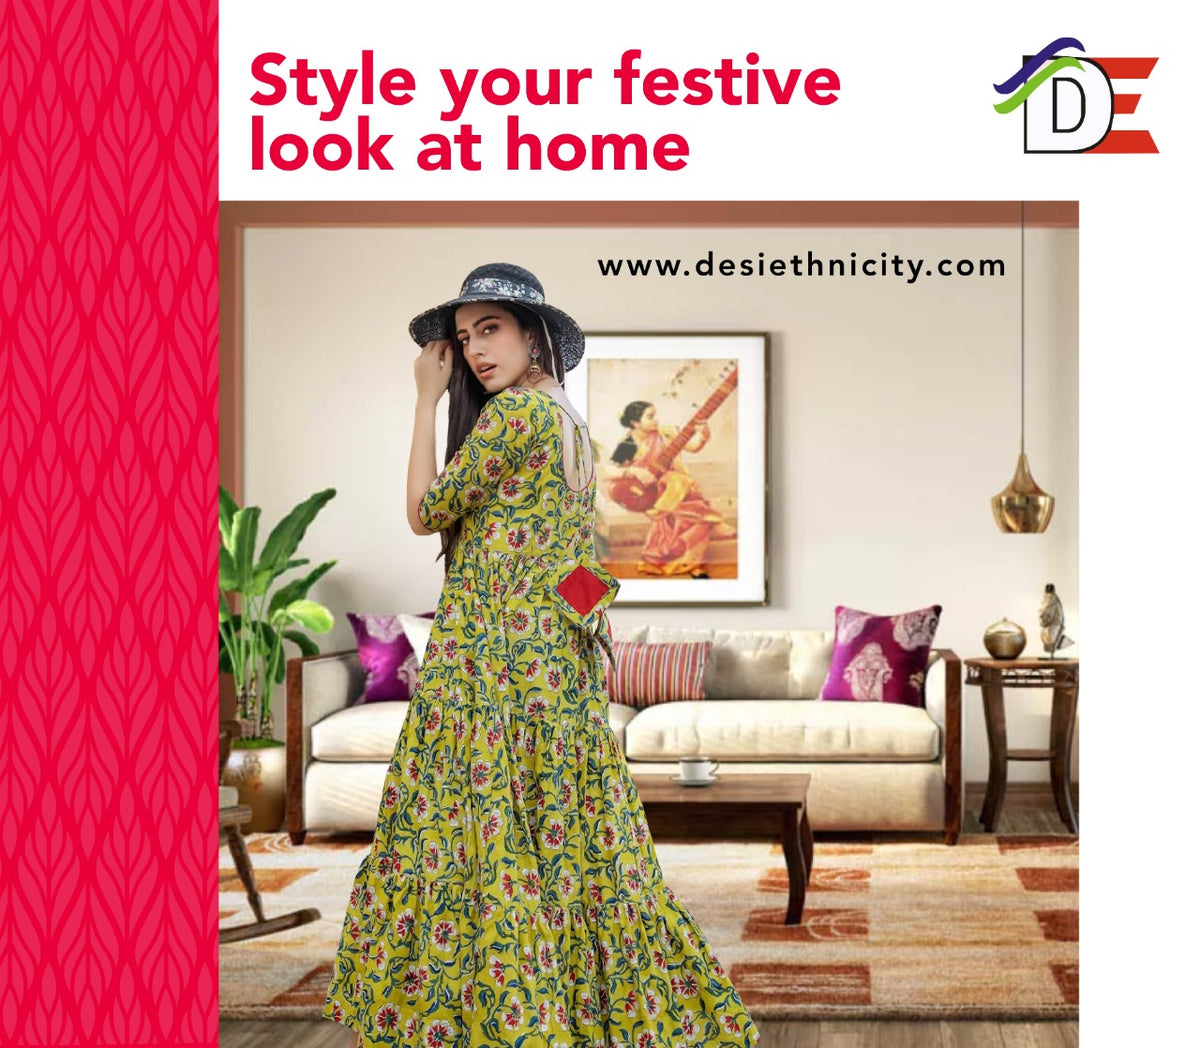 Style your festive look at home